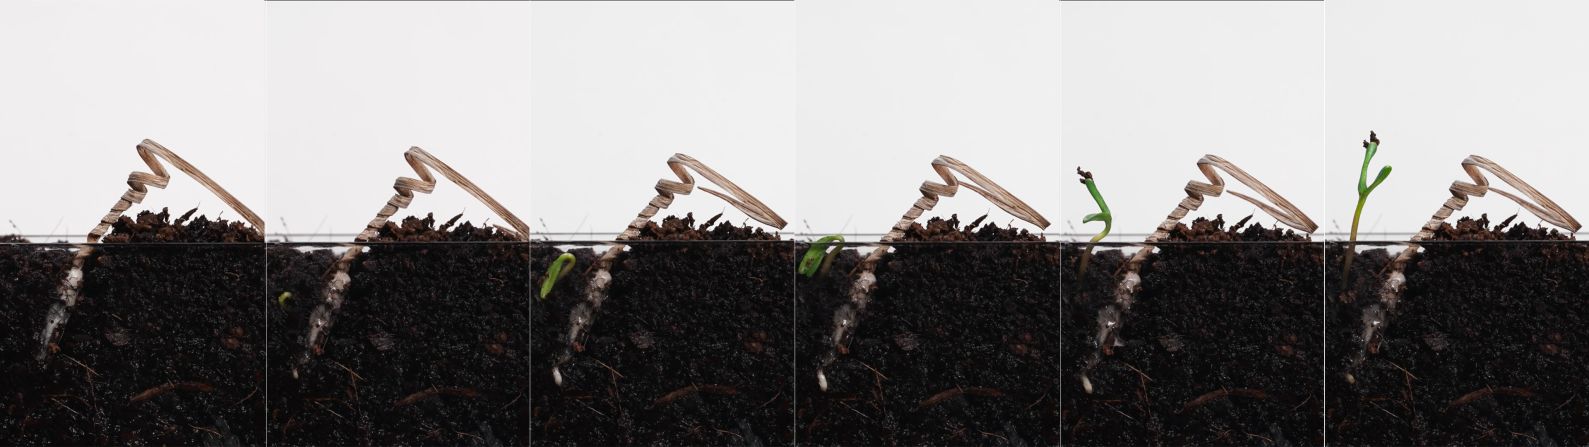 After the carrier burrows, the seed is protected from animals and the elements, improving its chances of germination. This composite image shows a seed germinating.